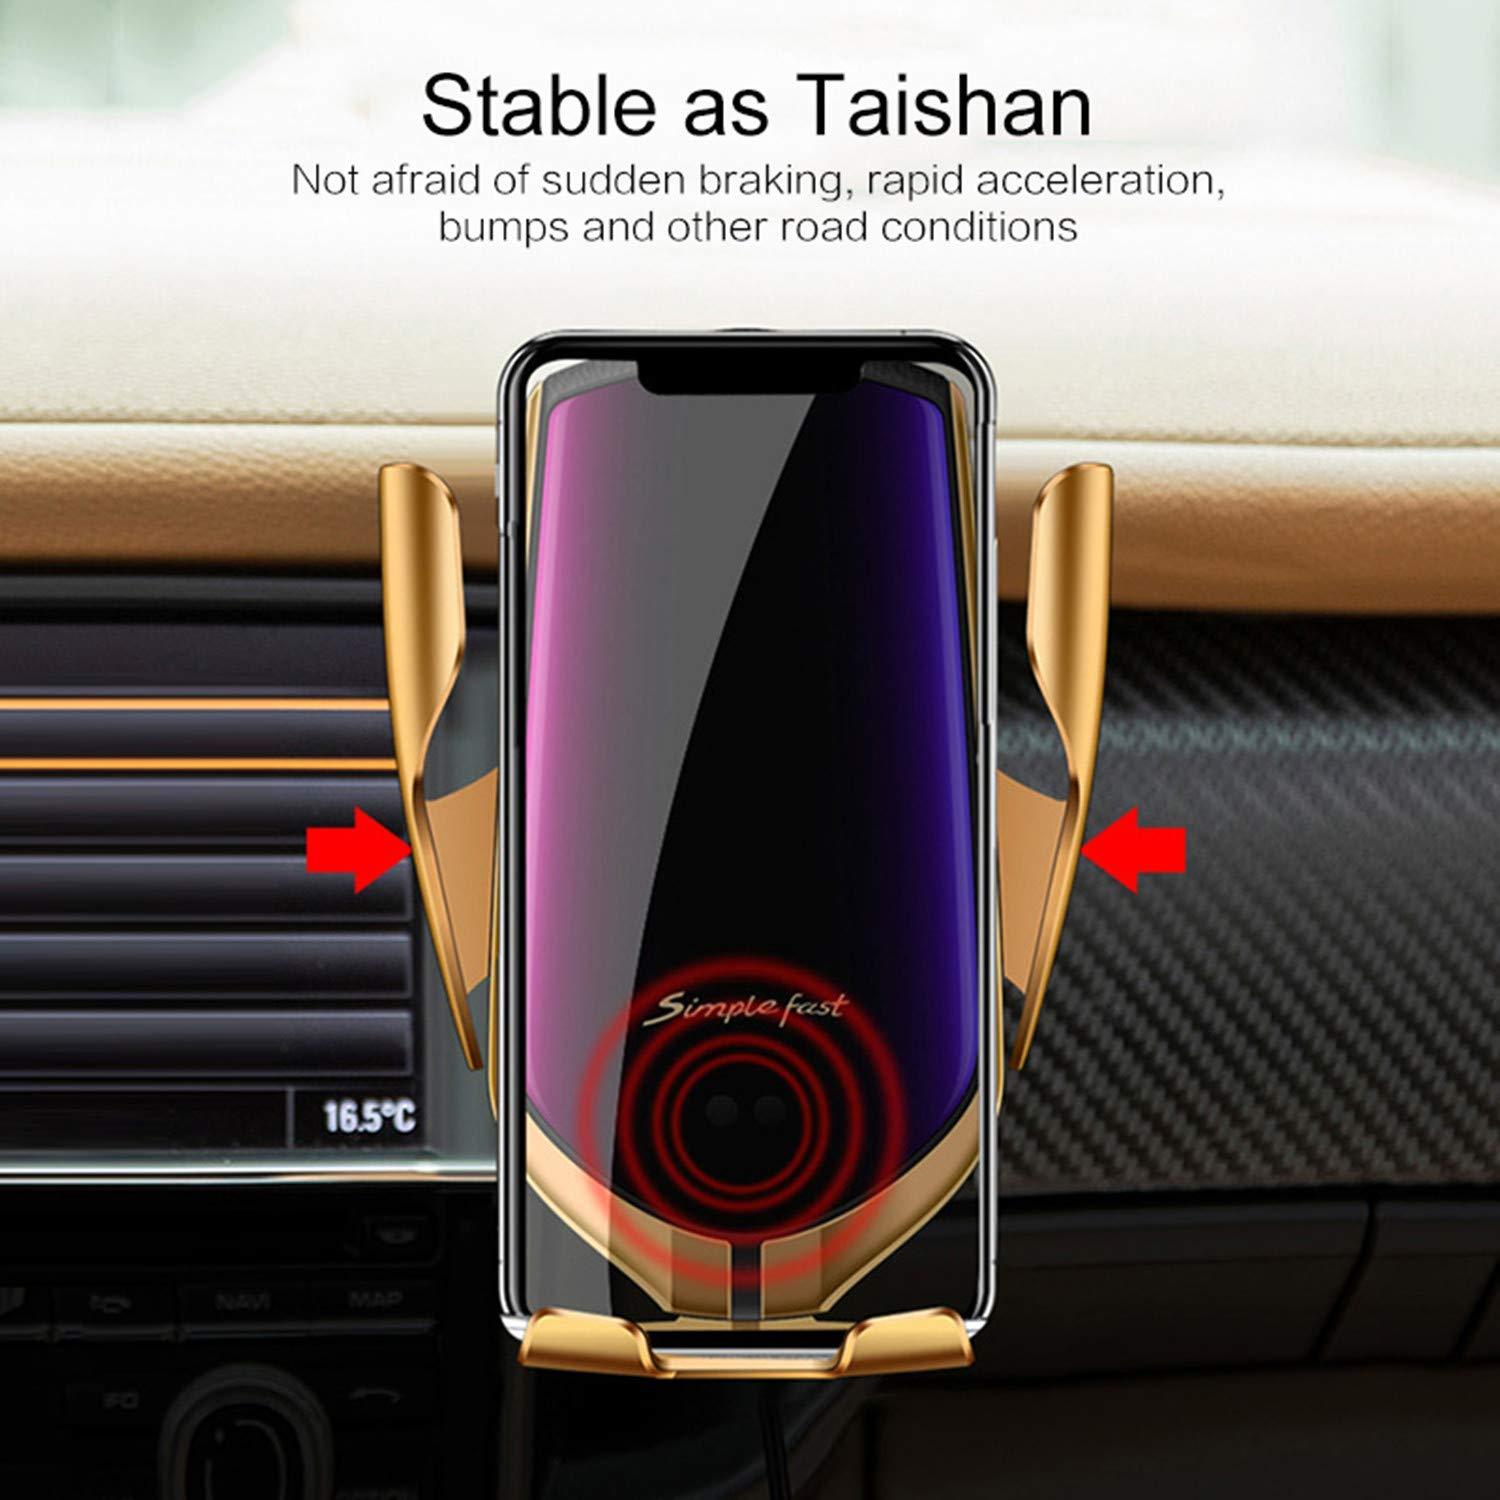 Wireless Automatic Sensor Car Phone Holder And Charger